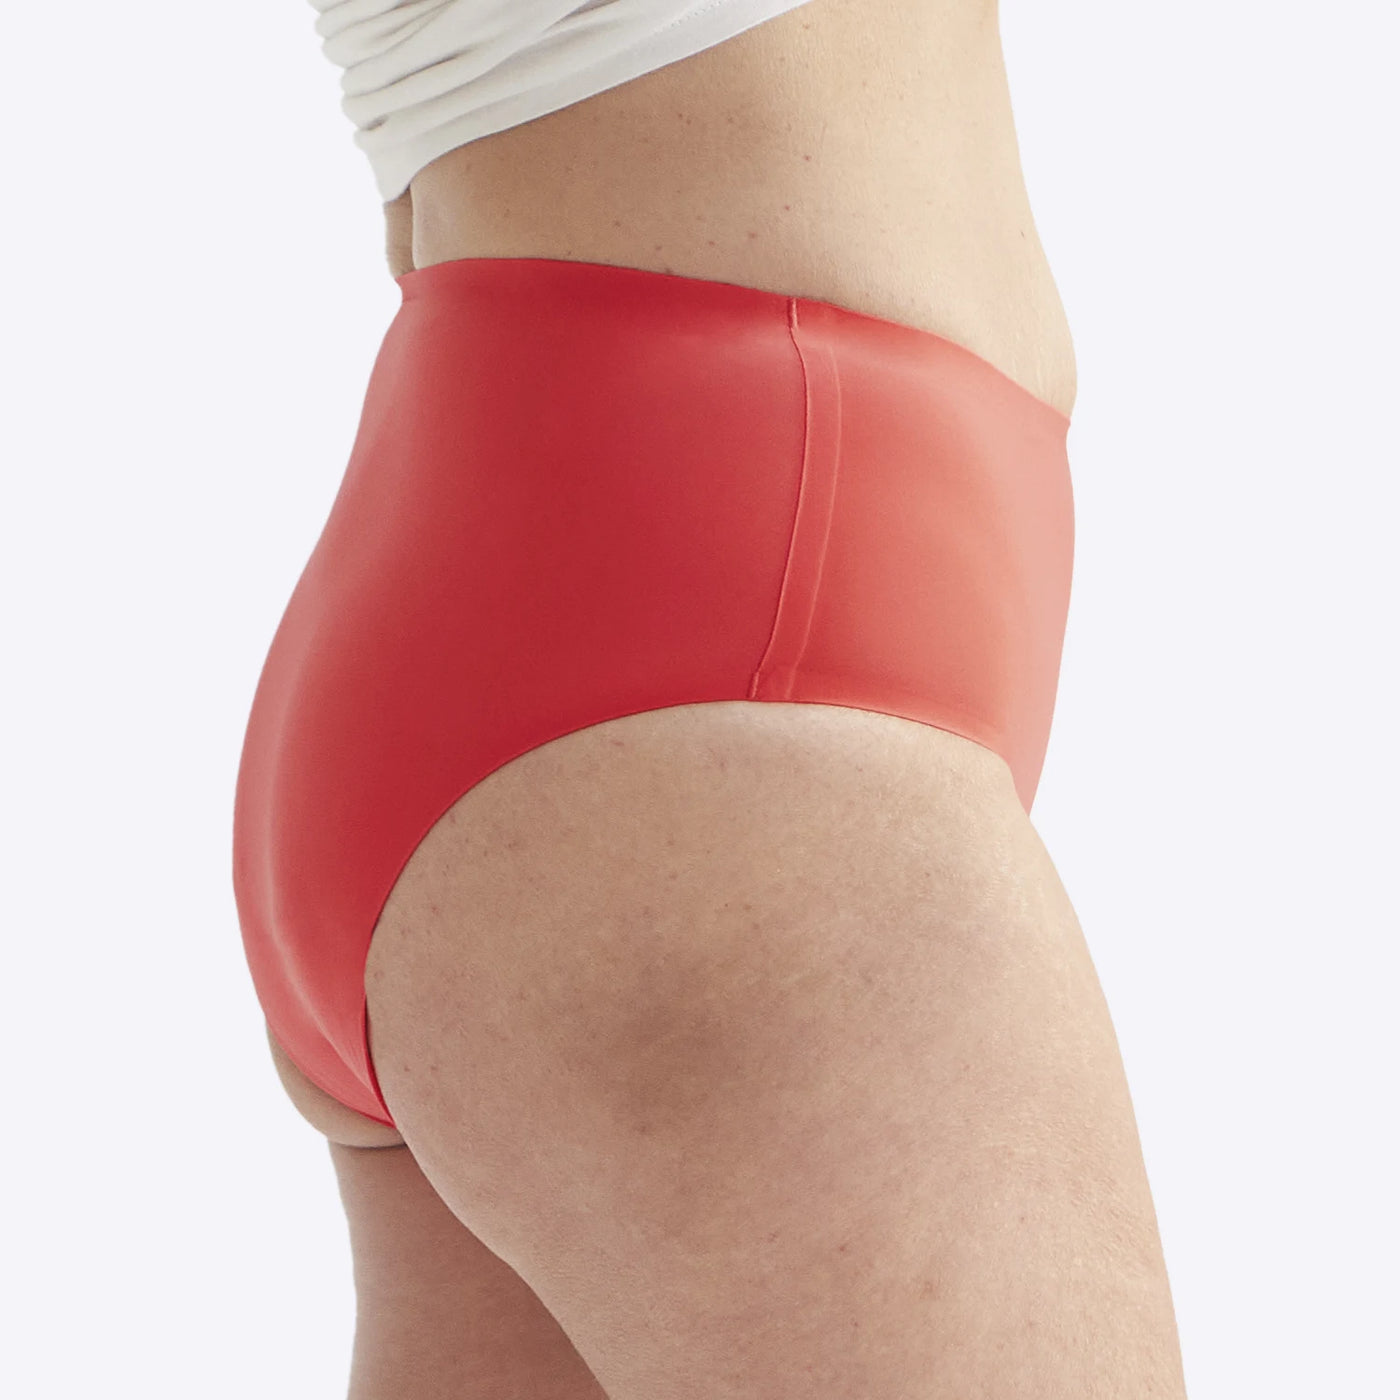 WUKA Drytech Midi Brief Incontinence Pants Style Coral Pink Colour Side